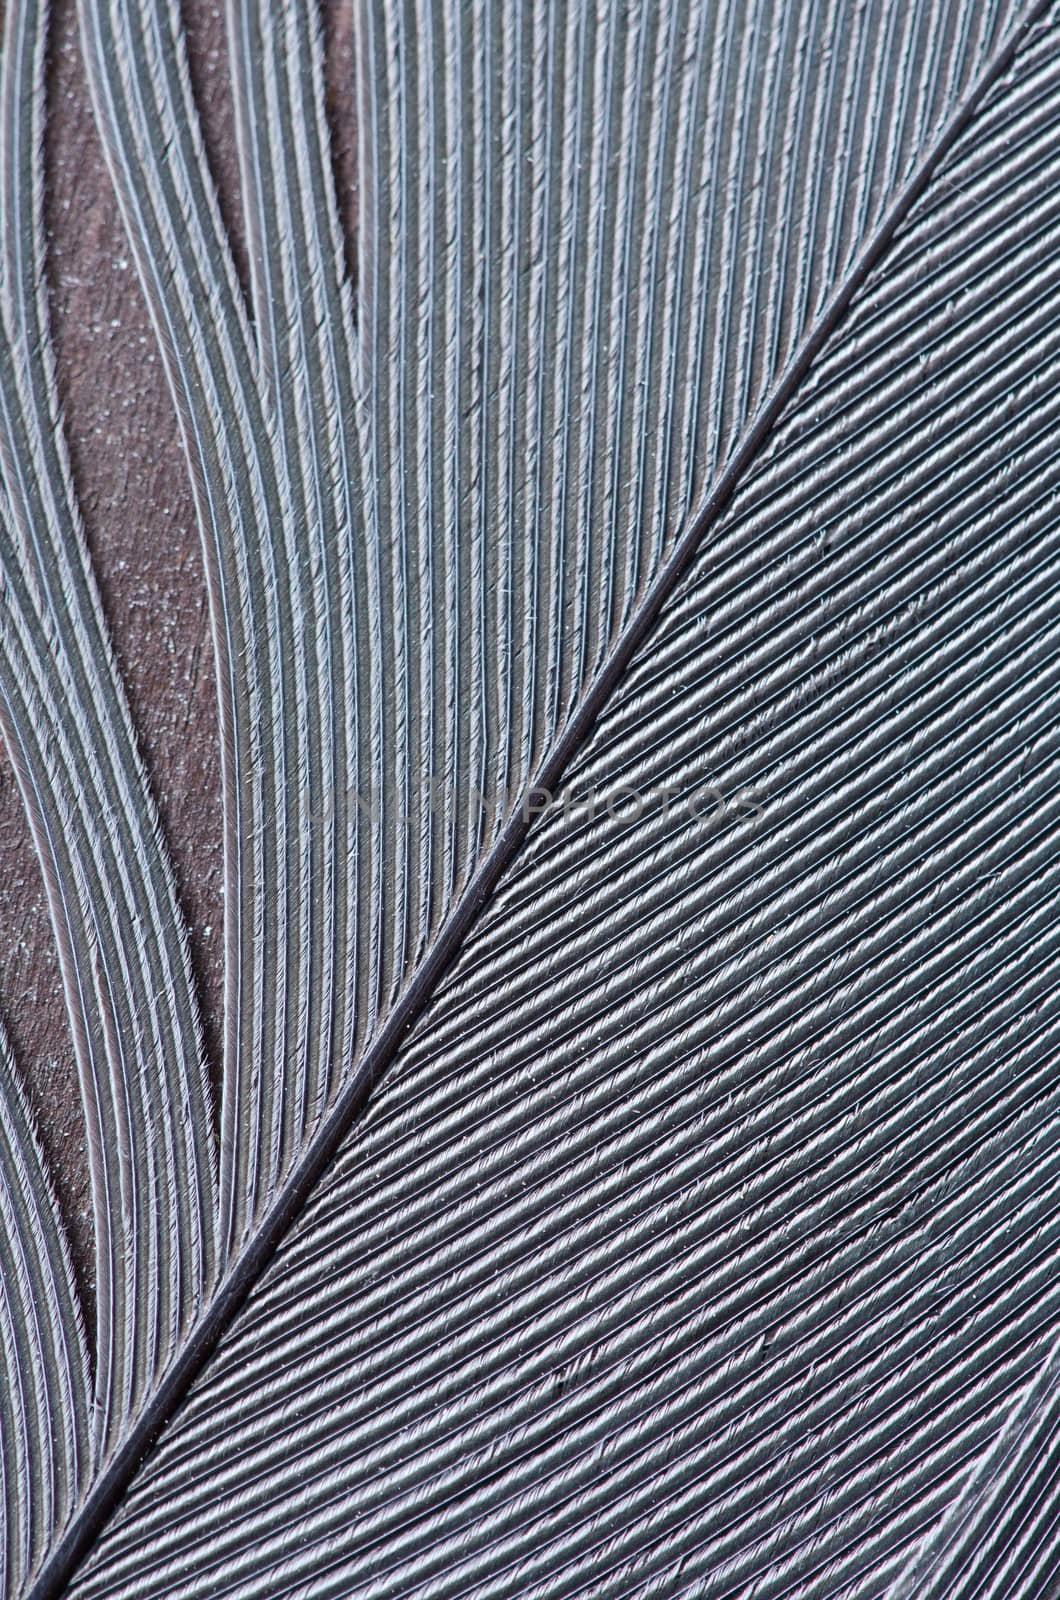 Detail of nice stork feather texture on dark wood surface.